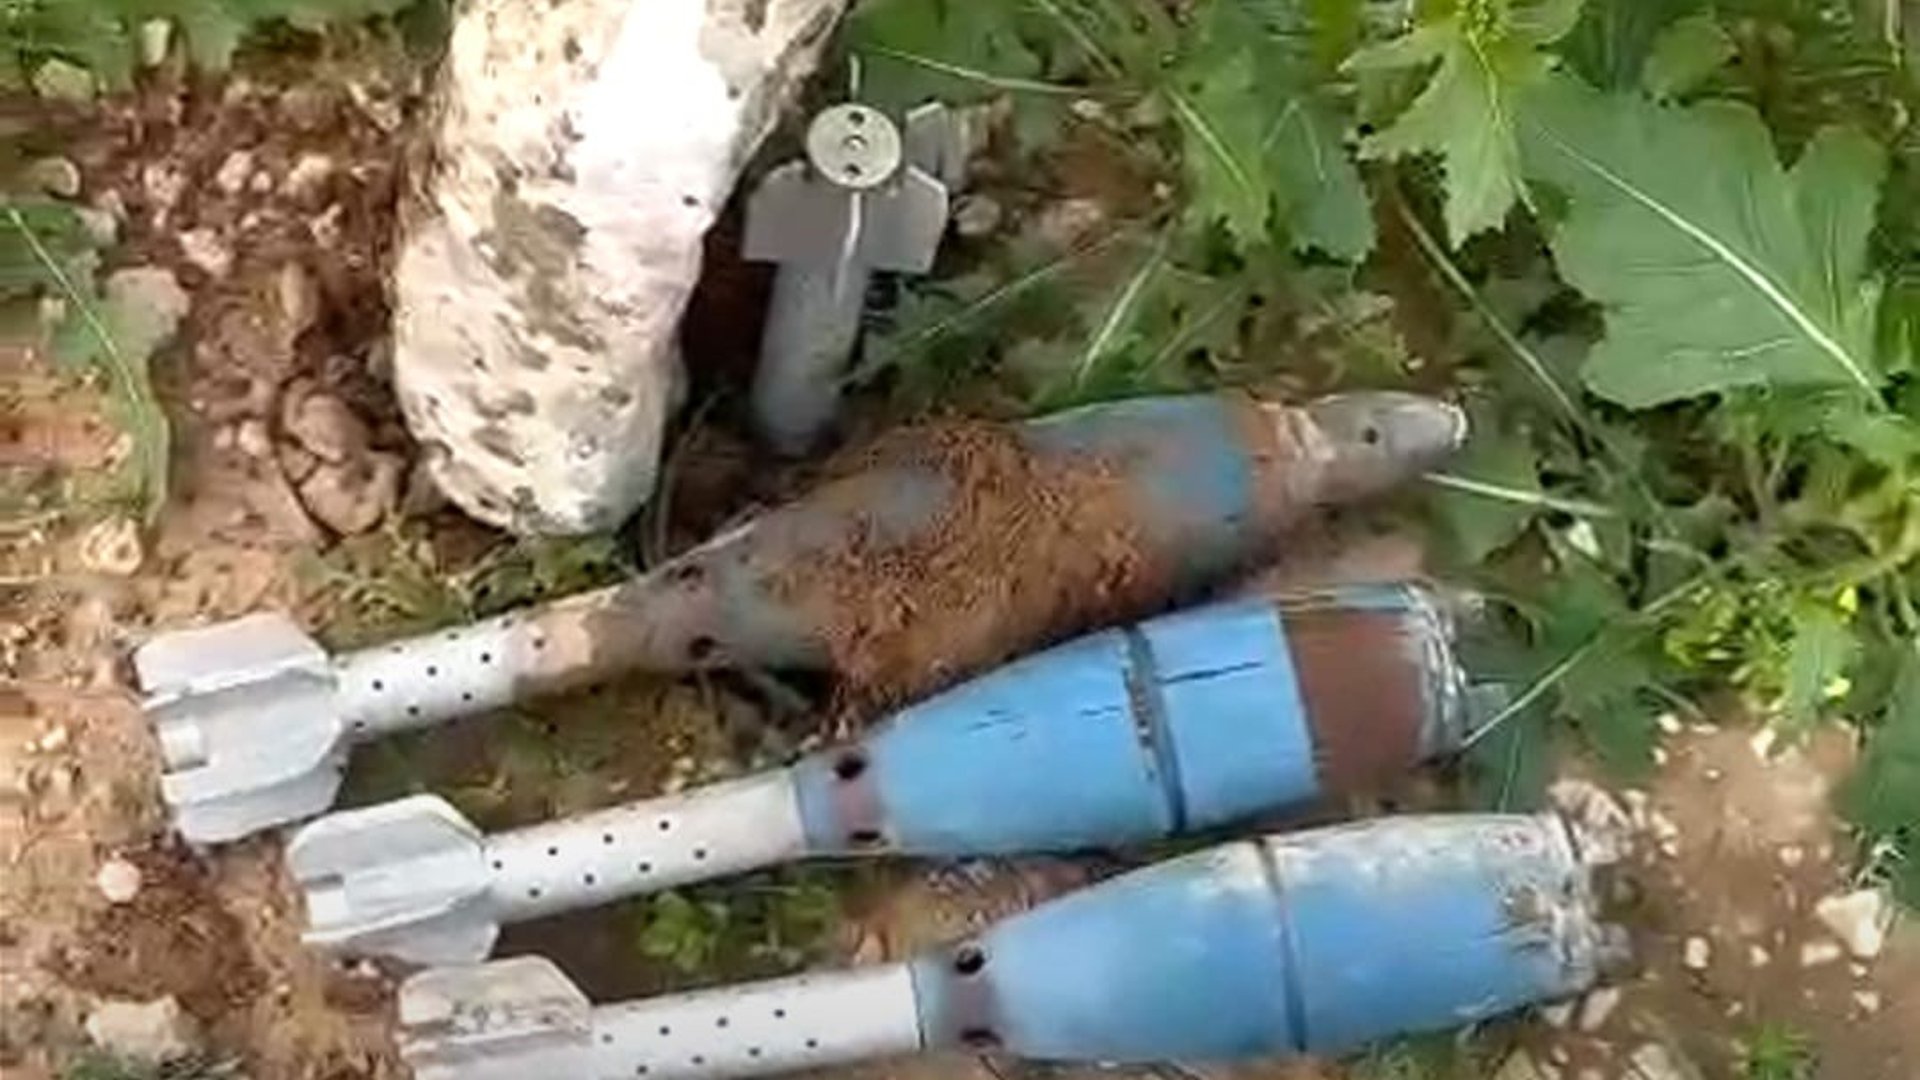 Unexploded ordnance found by local residents in Makhmur